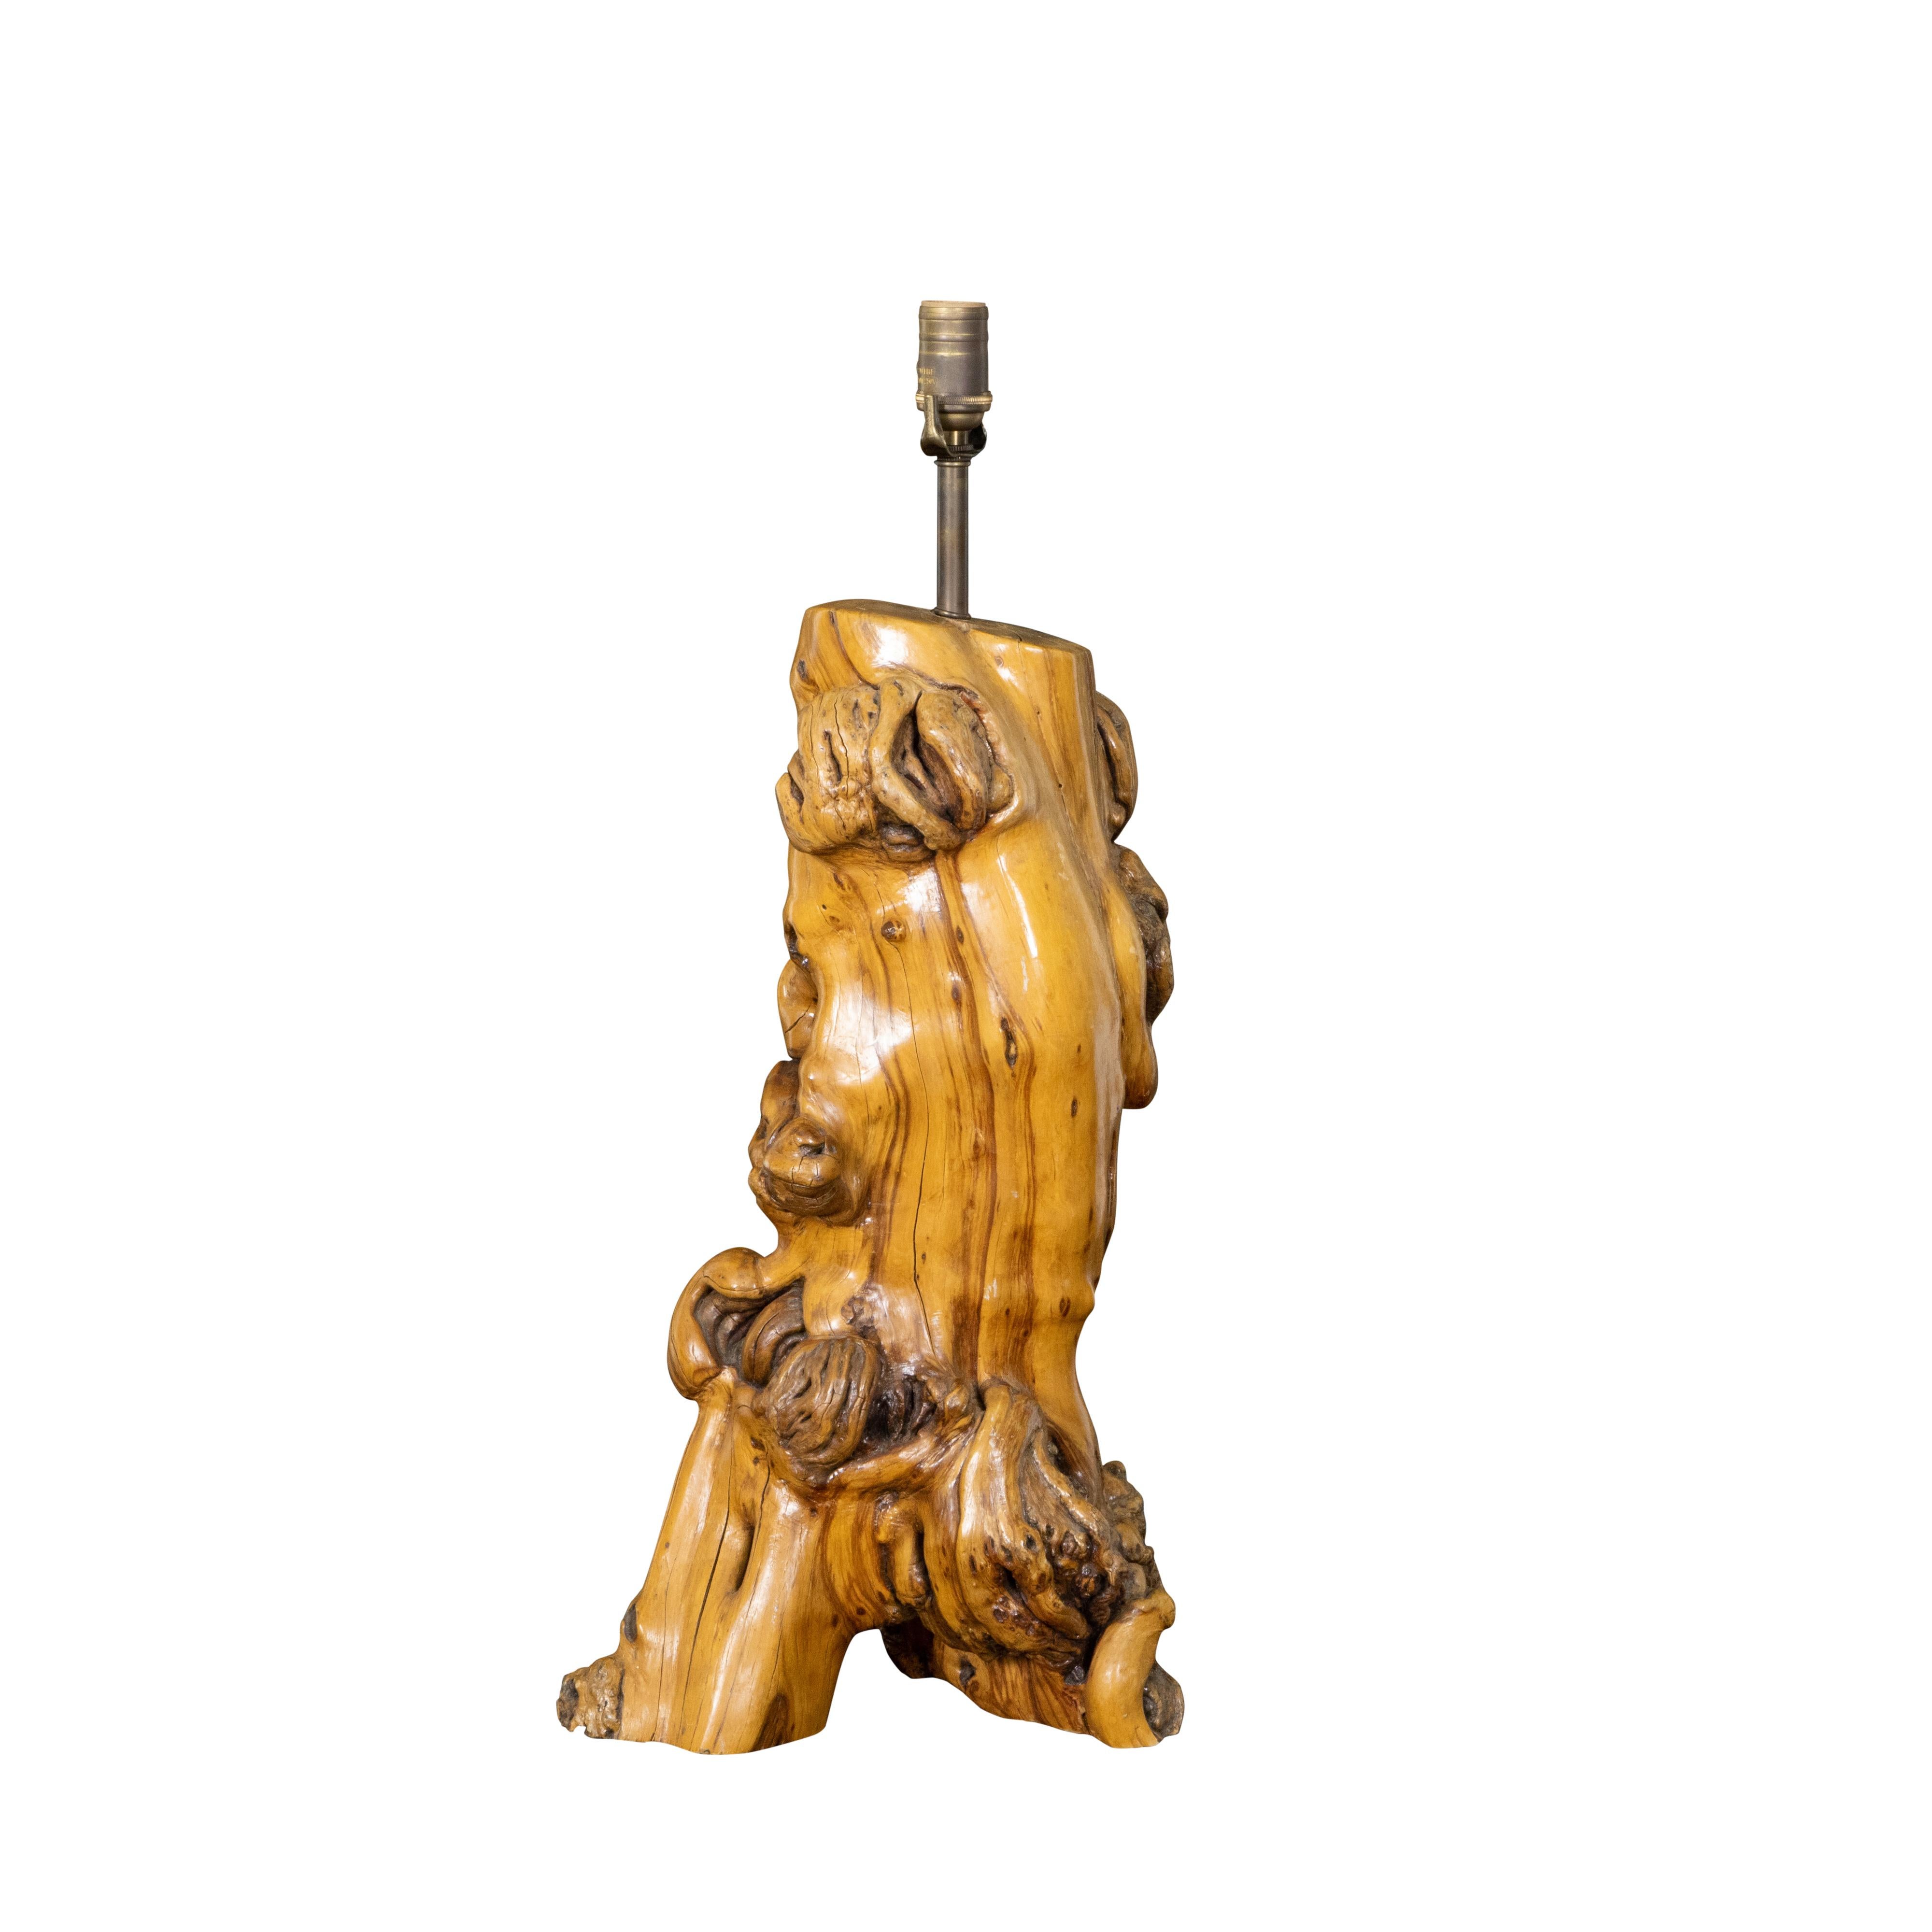 An American driftwood burl table lamp from the Mid-20th Century with single socket and rustic character. Crafted in the USA during the second quarter of the 20th century, this table lamp charms us with its burl wood structure and great rustic